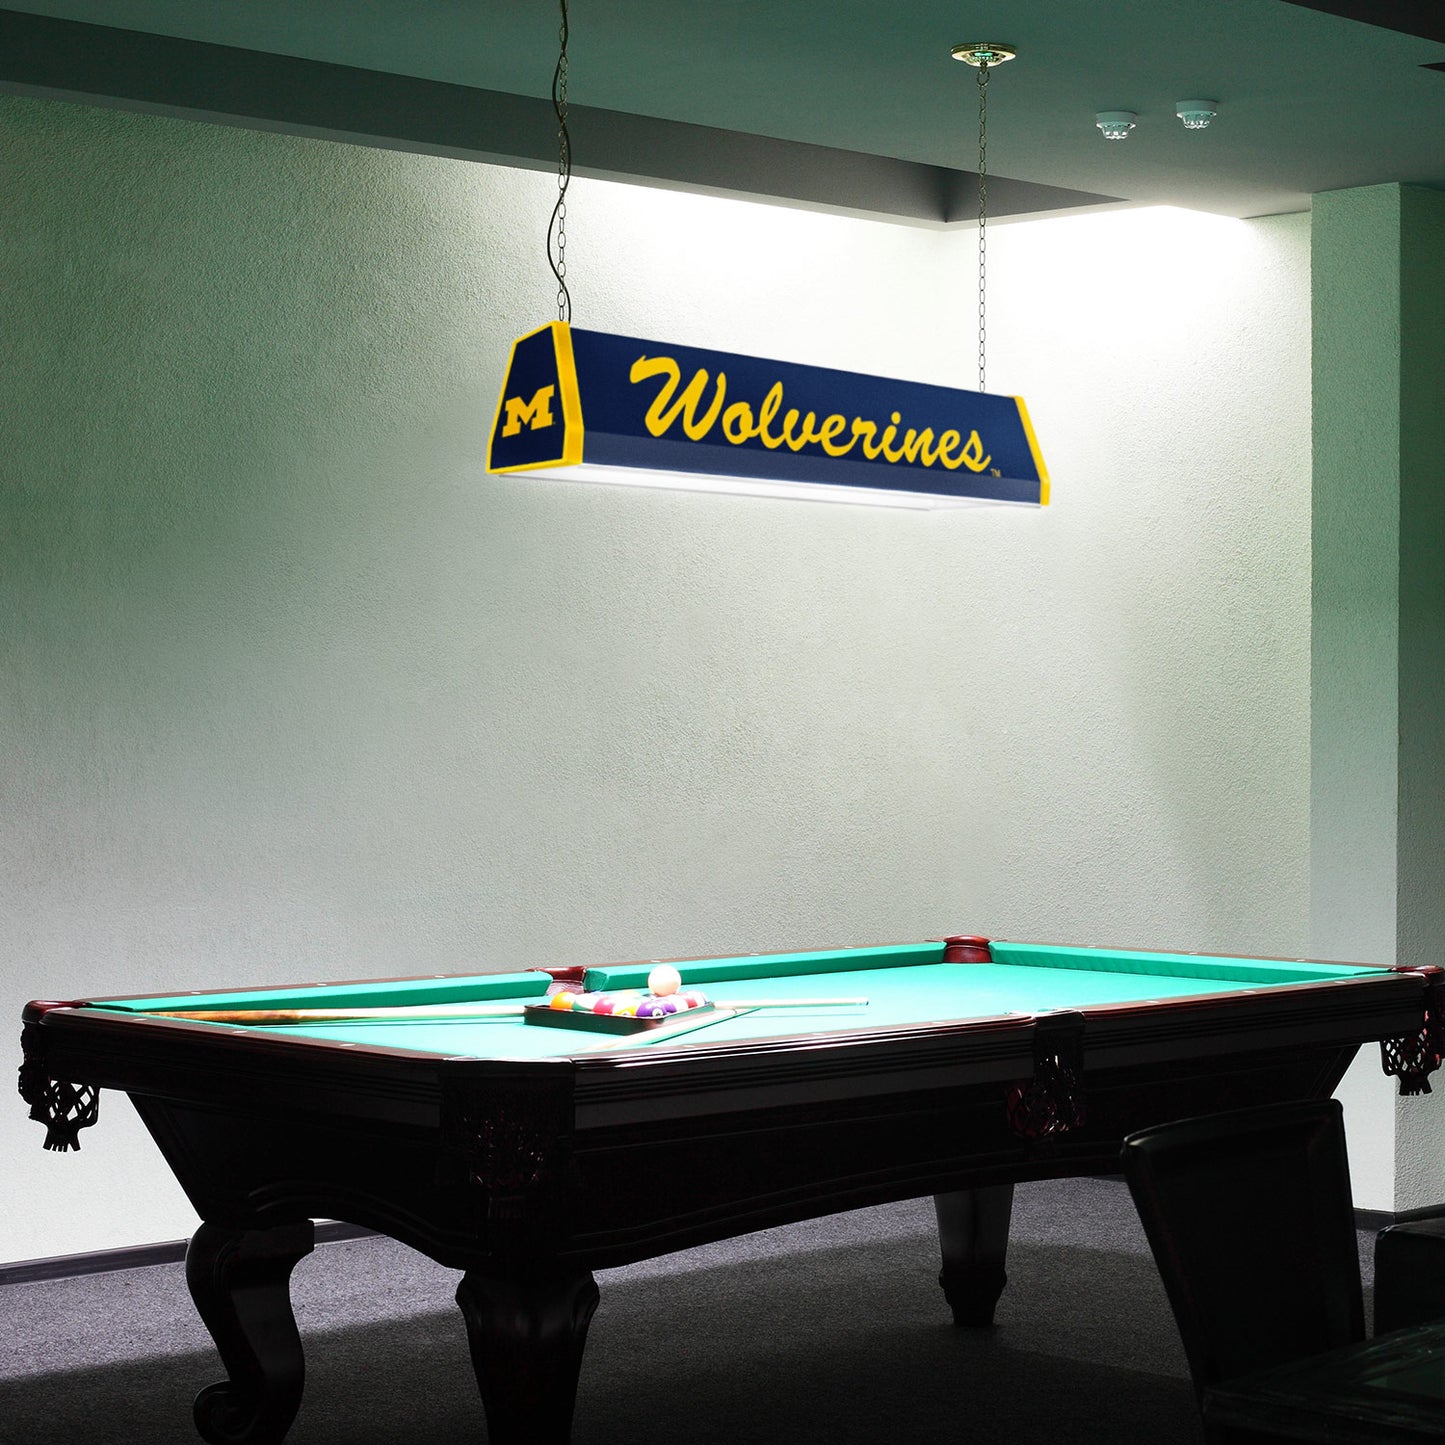 Michigan Wolverines Standard Pool Table Light Room View